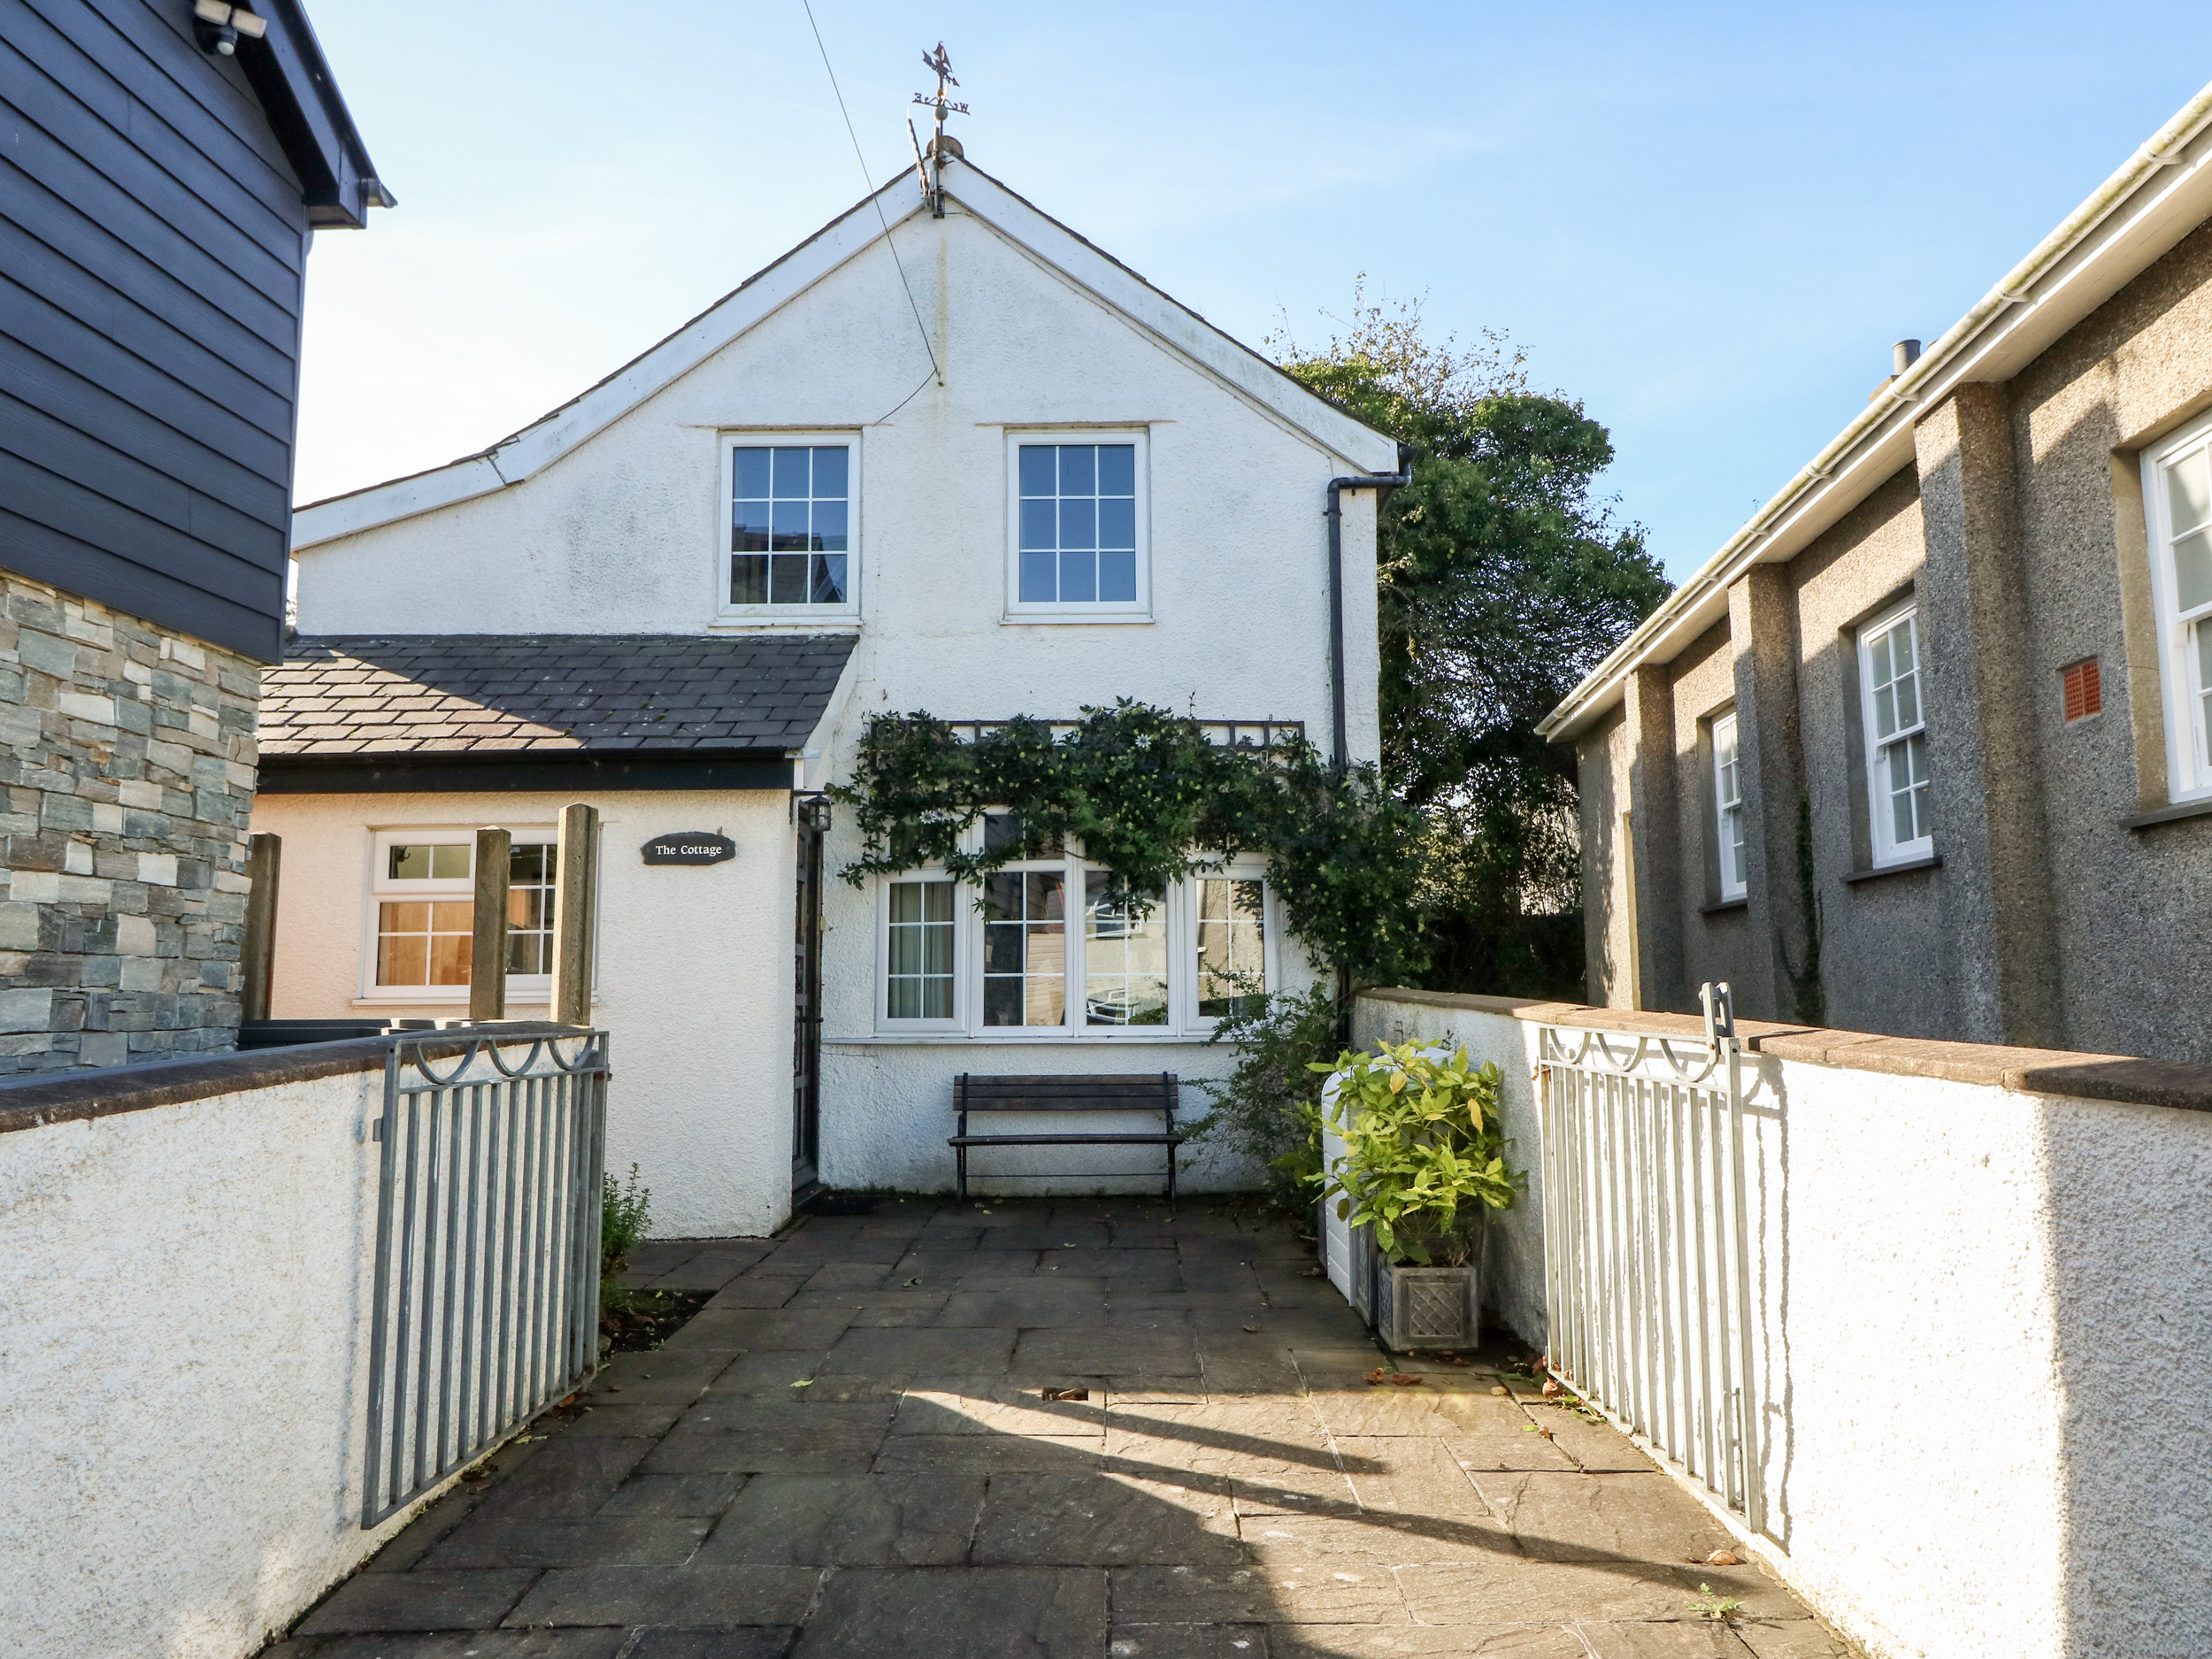 3 bedroom Cottage for rent in Abersoch